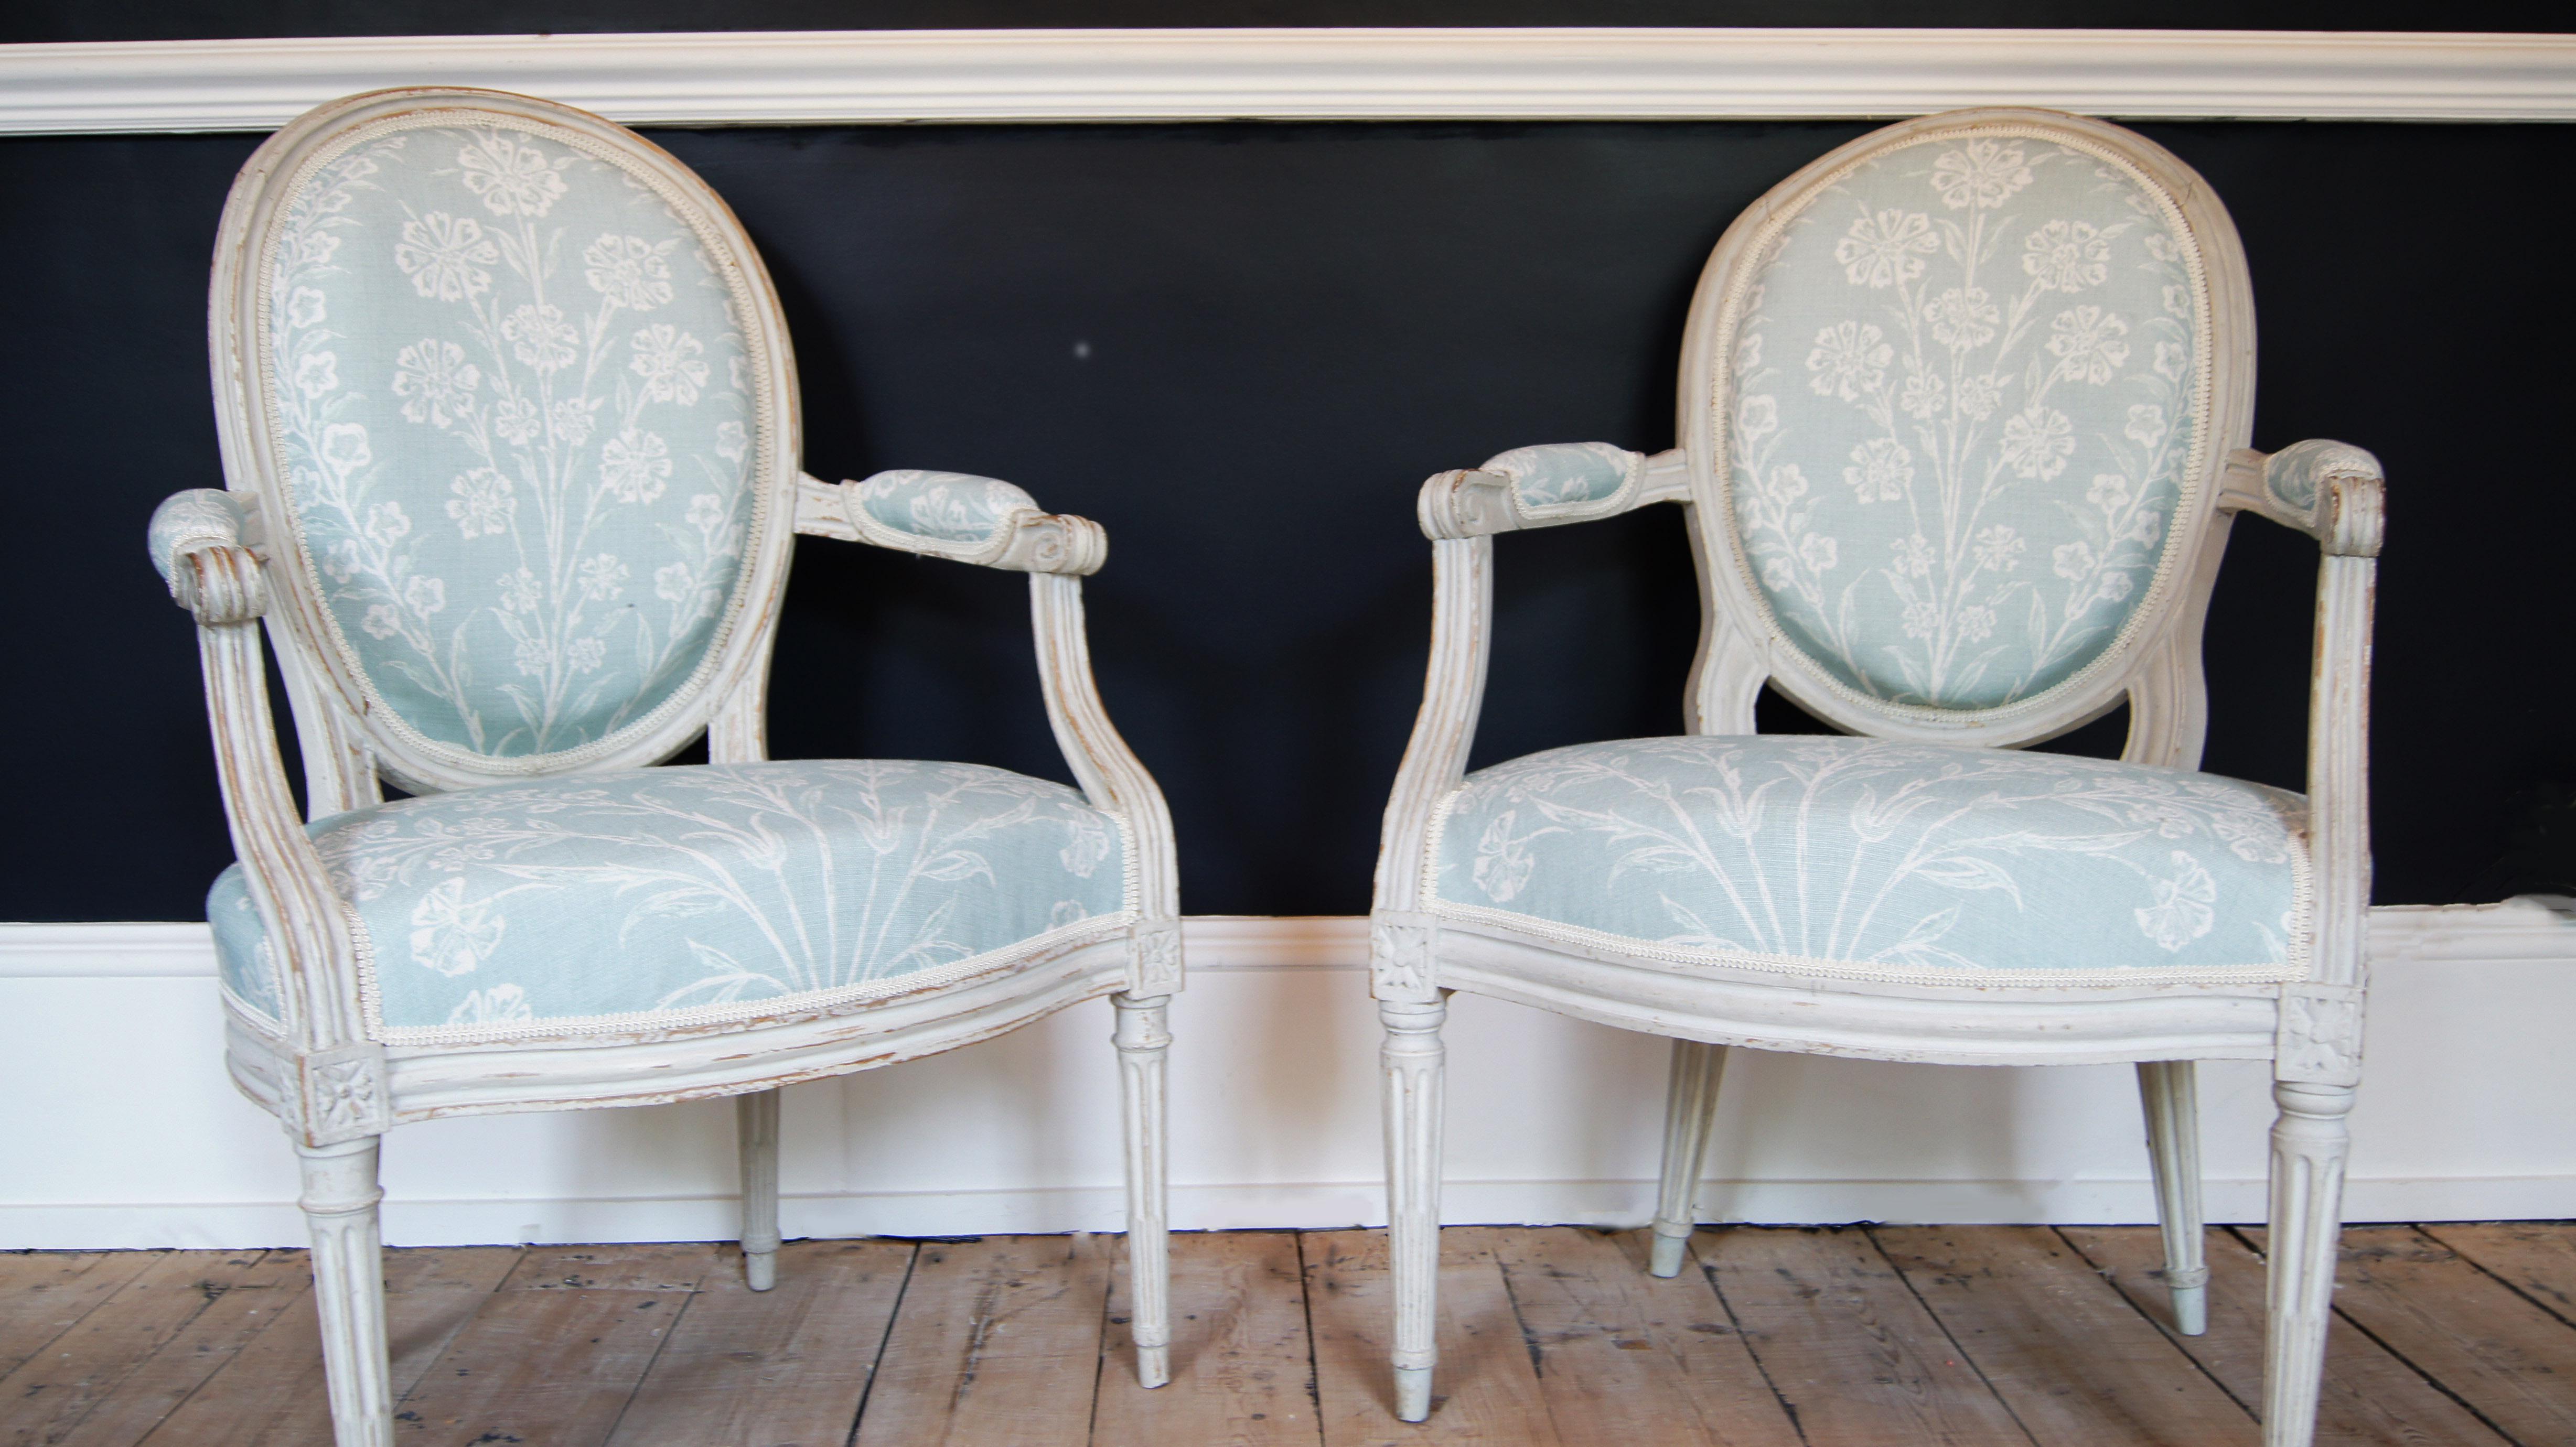 A pair of French carved and painted Louis XVI fauteuils, with oval backs, seats and armrests upholstered in Chelwood fabric, designed by Nina Campbell. With grey/white painted frames. Both chairs bears the mark of Barthelemy Denis Chardon, Paris,